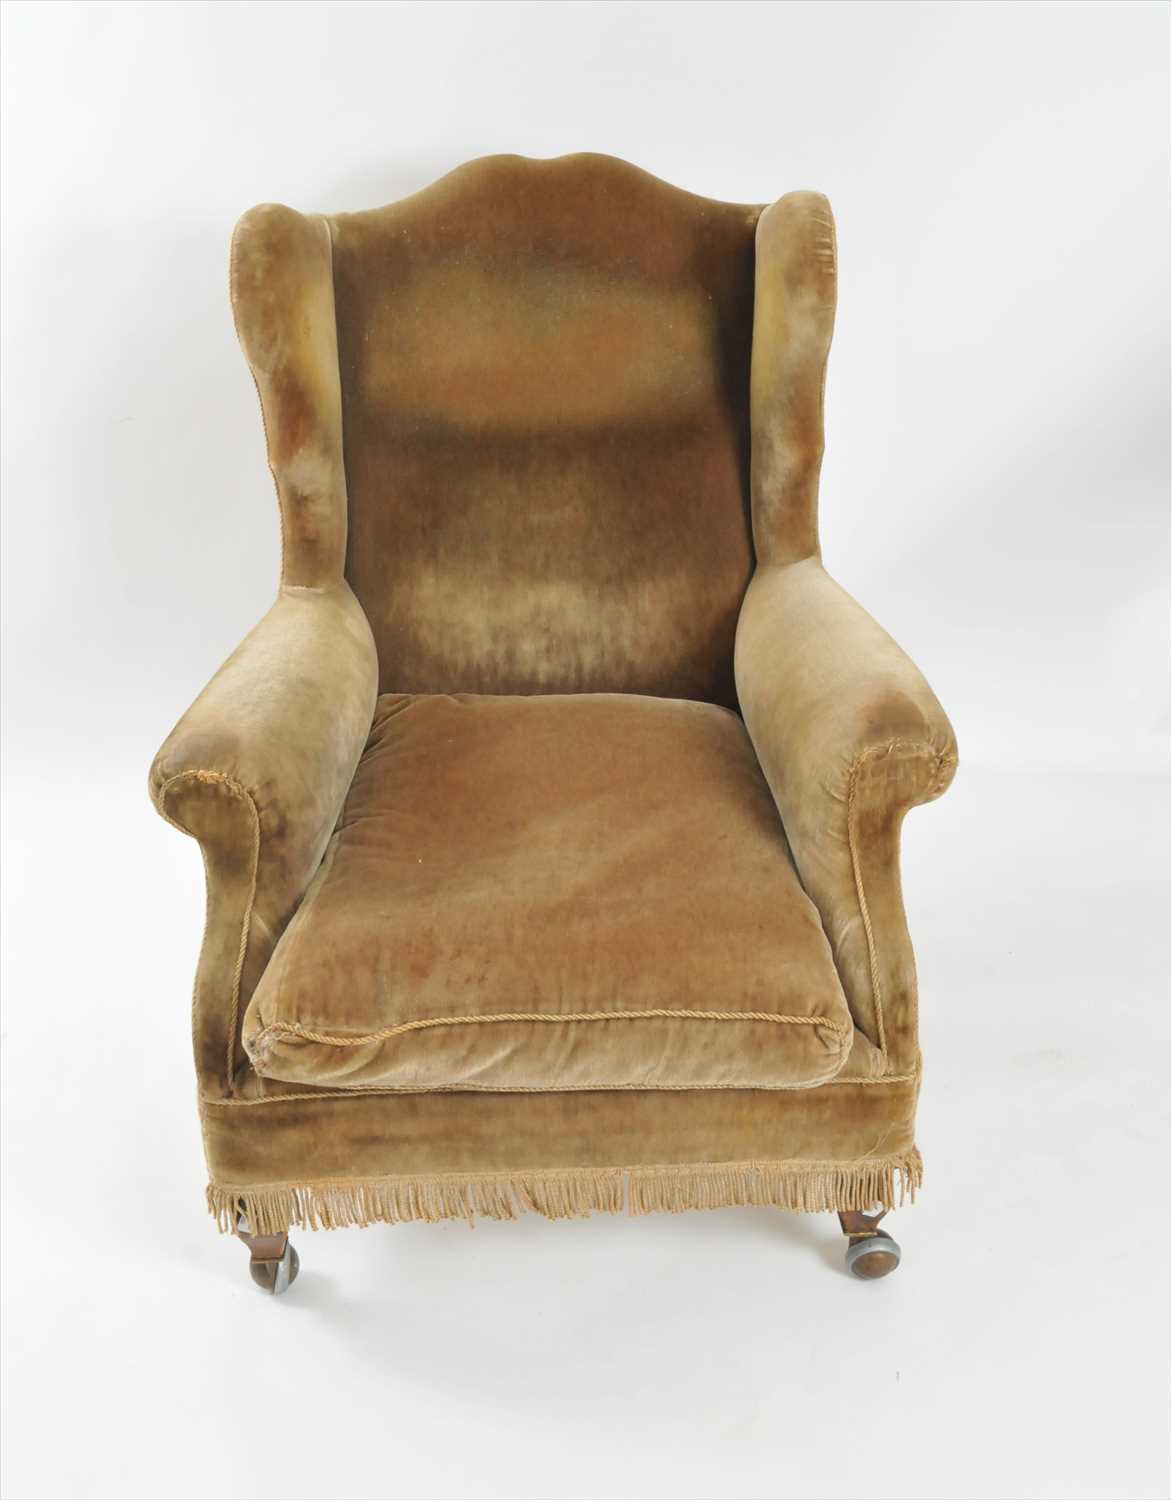 A 19th century upholstered wing armchair